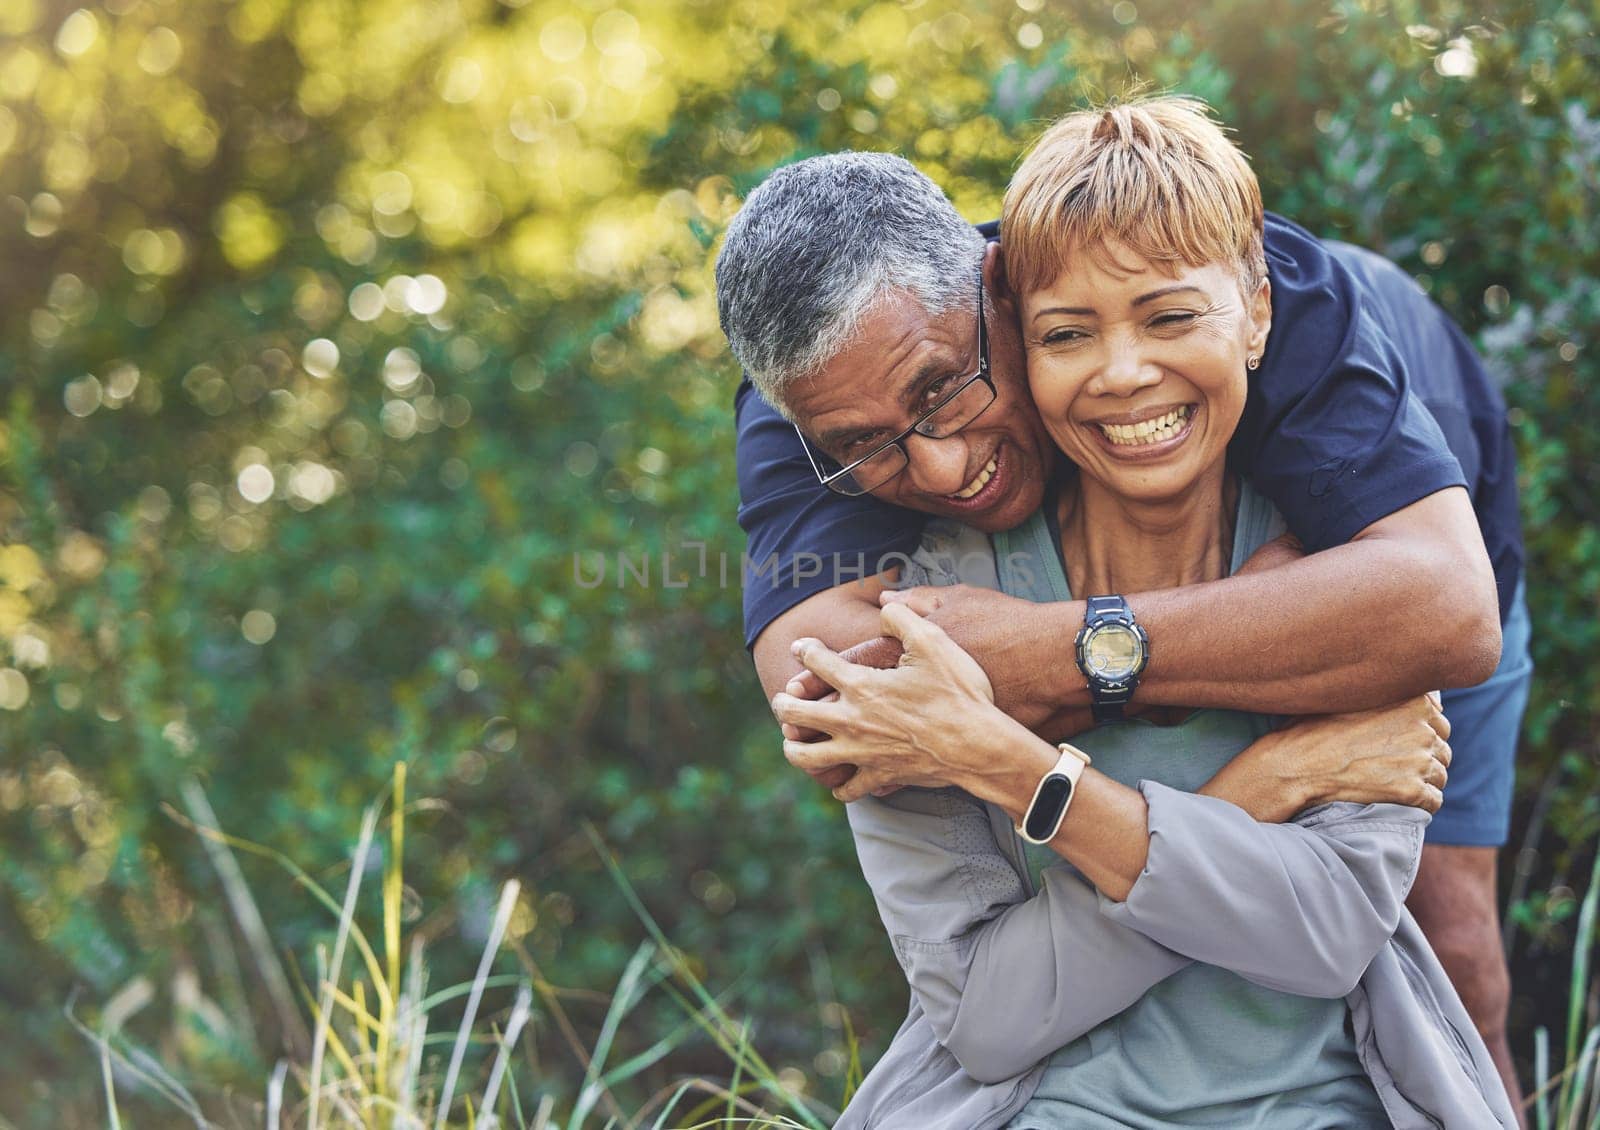 Nature, love and man hugging his wife with care, happiness and affection while on an outdoor walk. Happy, romance and portrait of a senior couple in retirement embracing in the forest, woods or park. by YuriArcurs